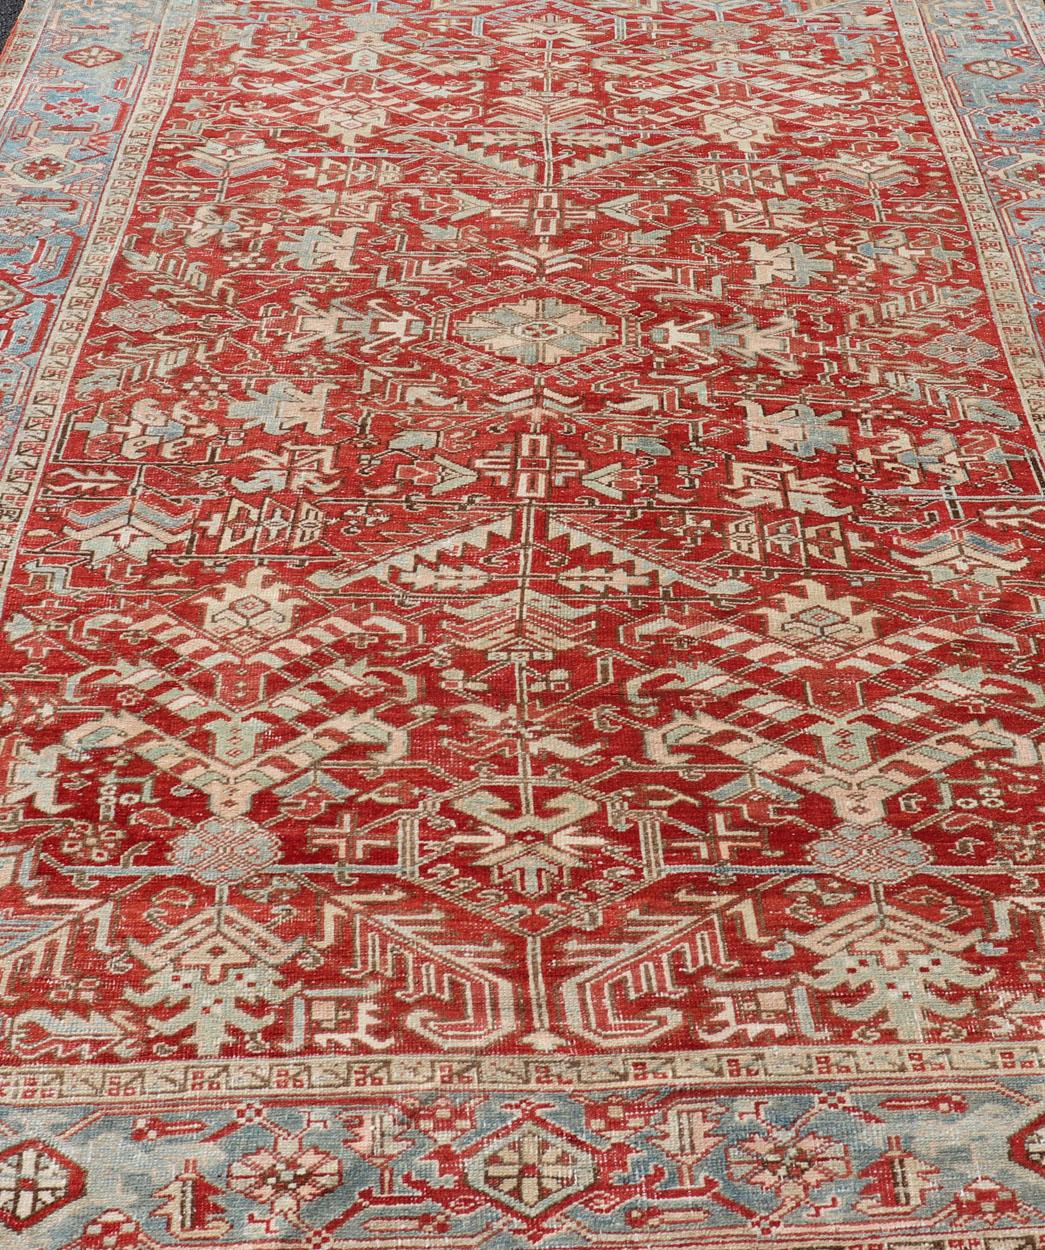 Antique Persian all-over Heriz rug with all-over geometric design in soft red and blue. Keivan Woven Arts / Rug / EMB-9630-P13578, country of origin / type: Iran /Heriz, circa 1920

Measures: 7'6 x 11.